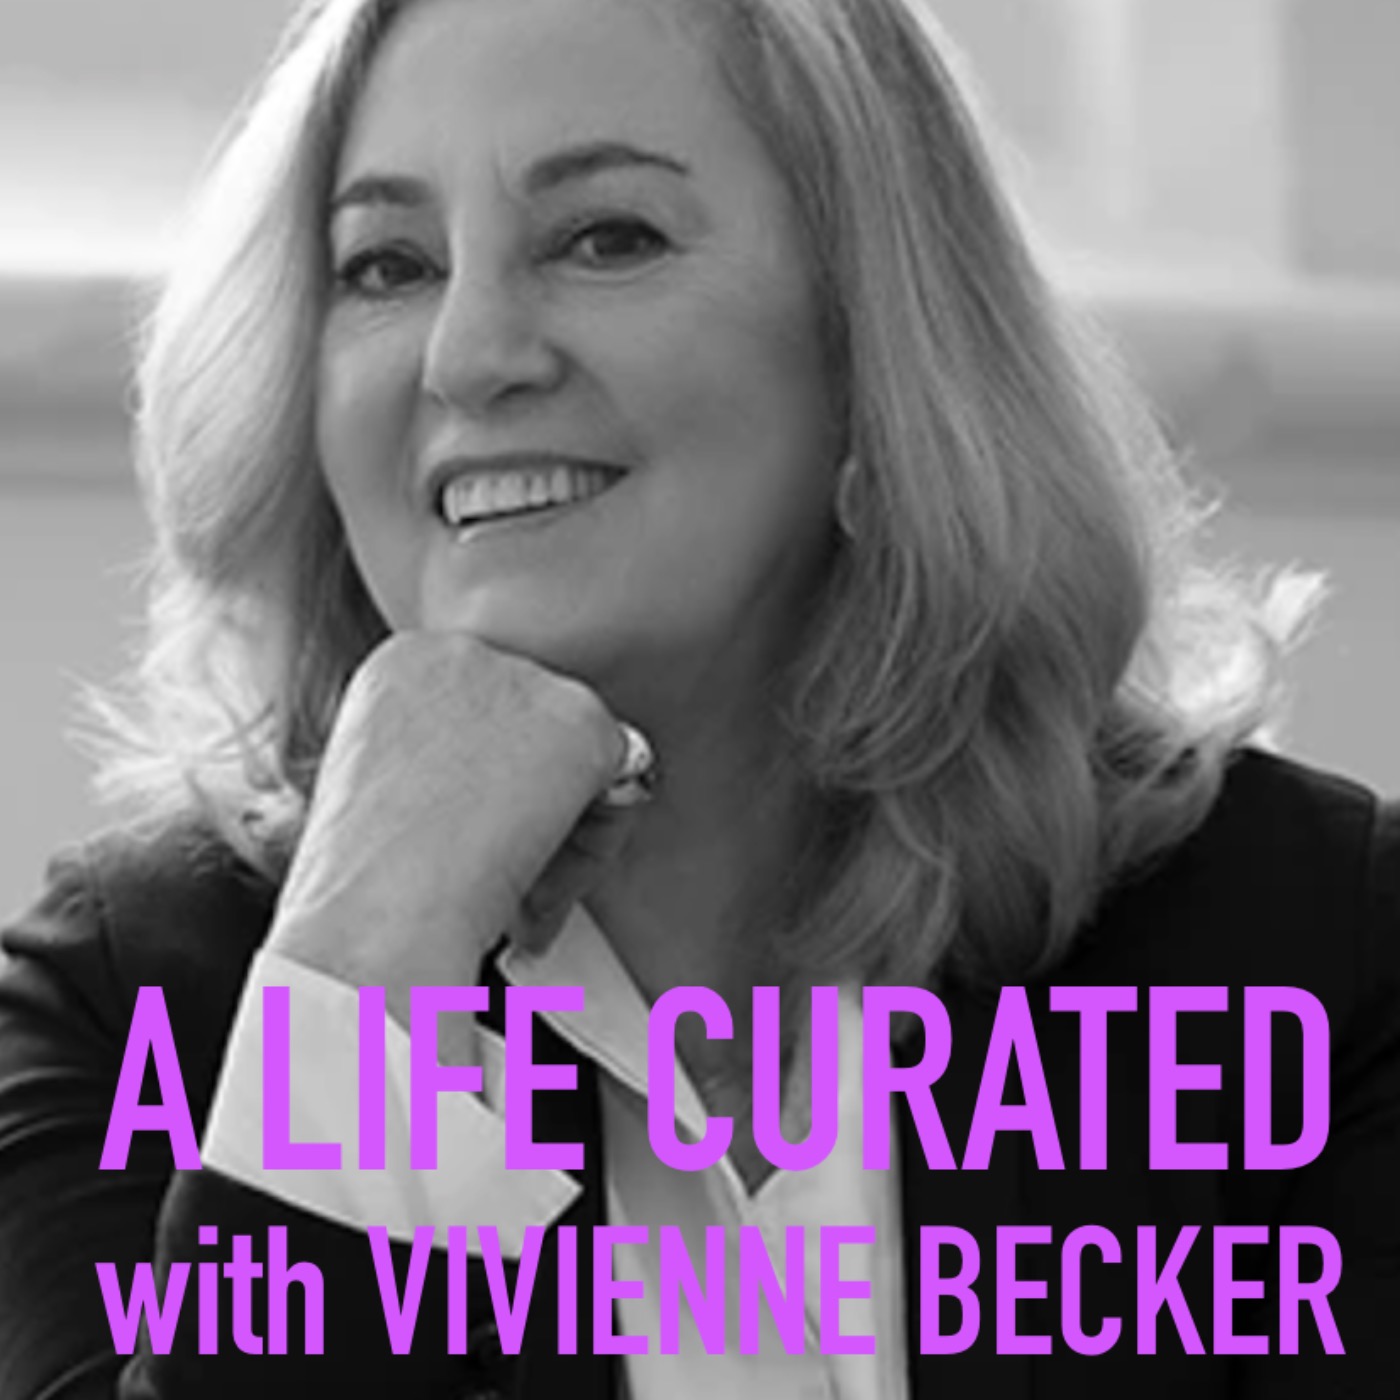 A Life Curated with Vivienne Becker